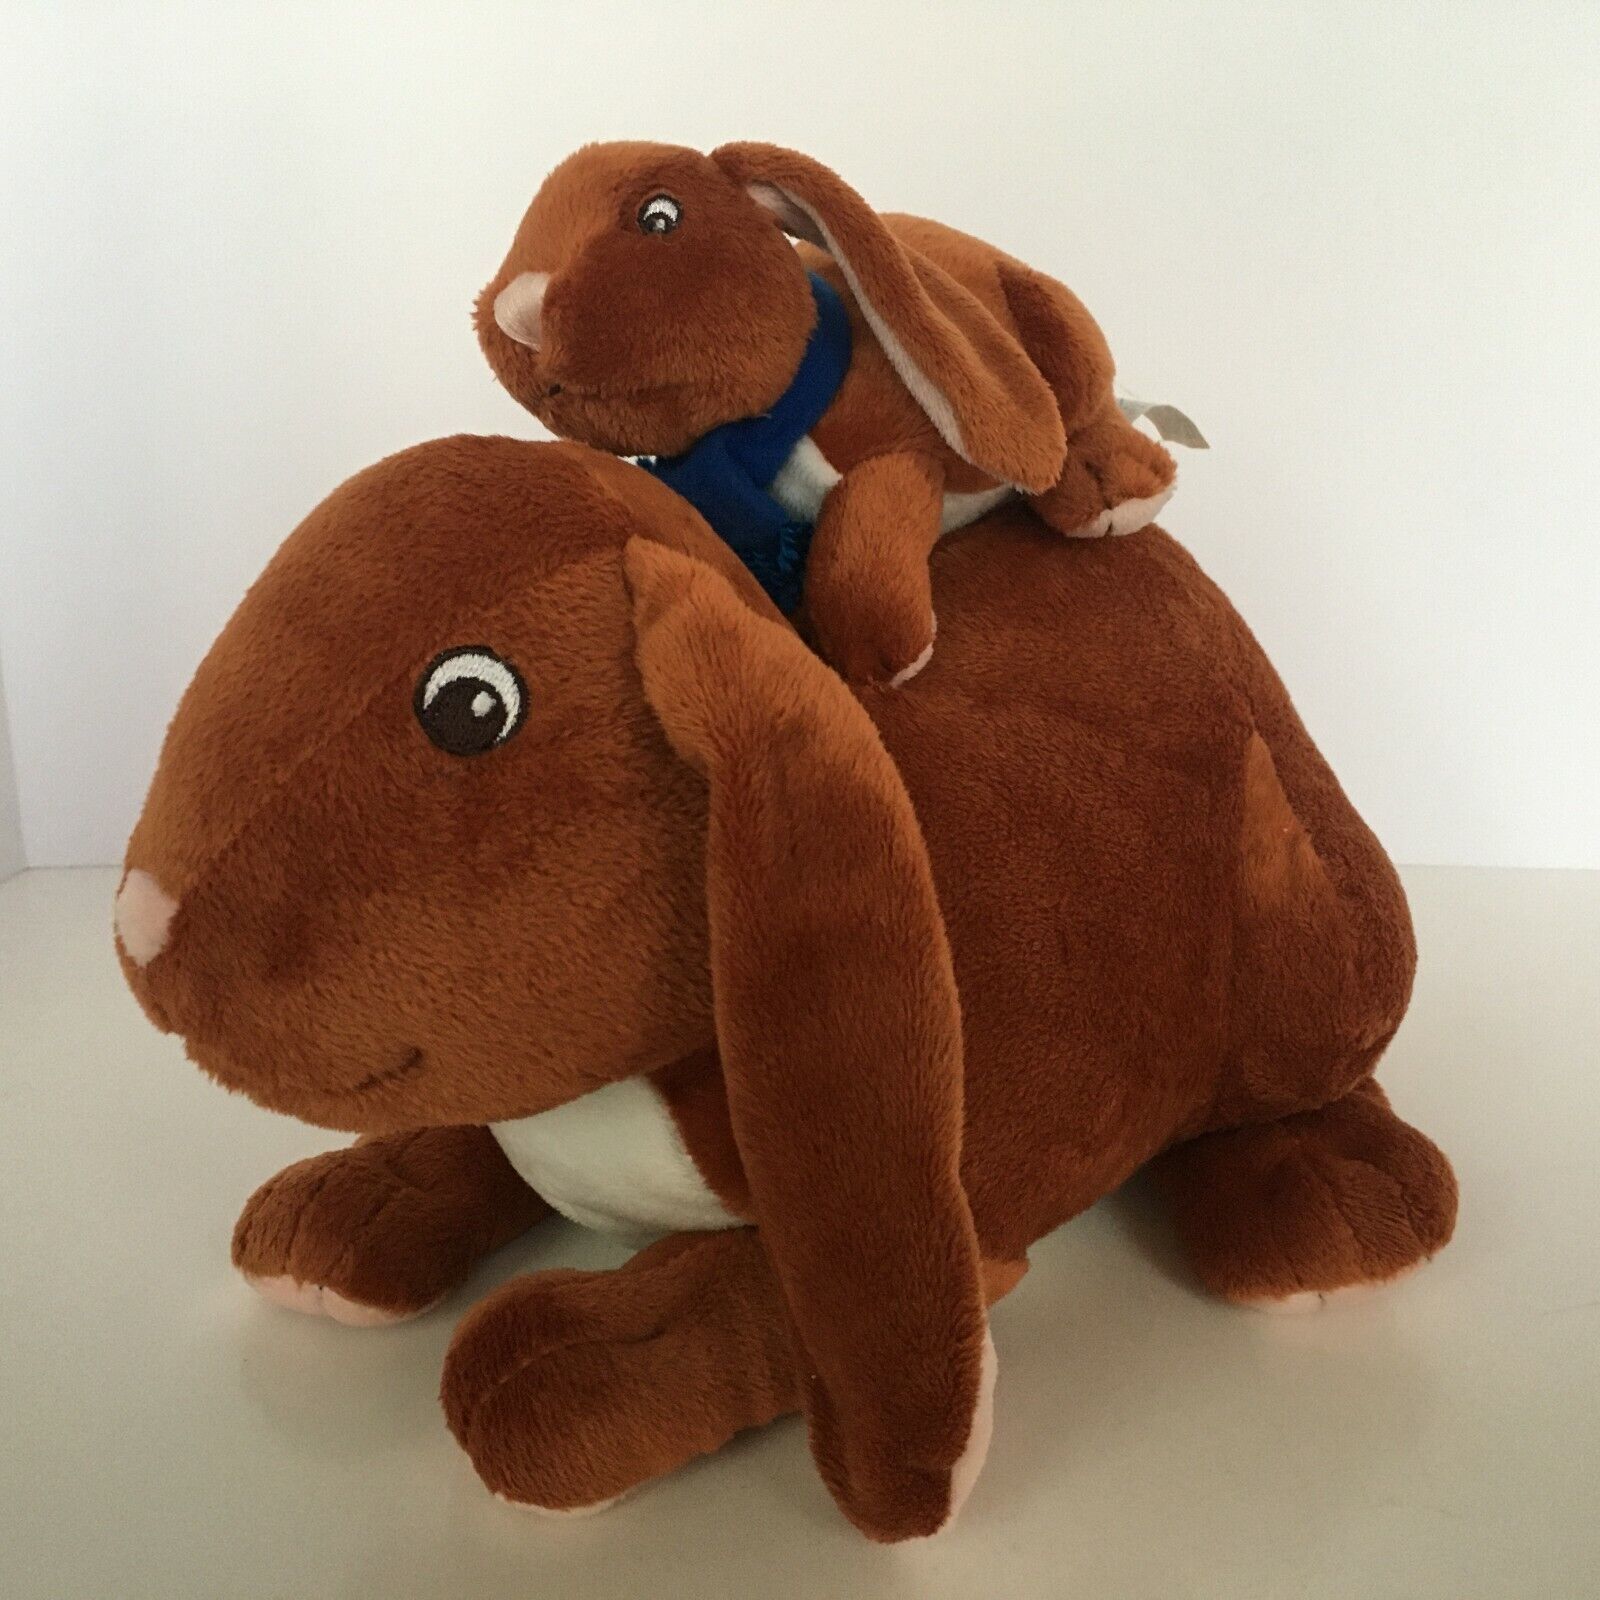 Kohls Guess How Much I Love You Stuffed Animal Bunny Rabbits Mother Child Brown - $9.99